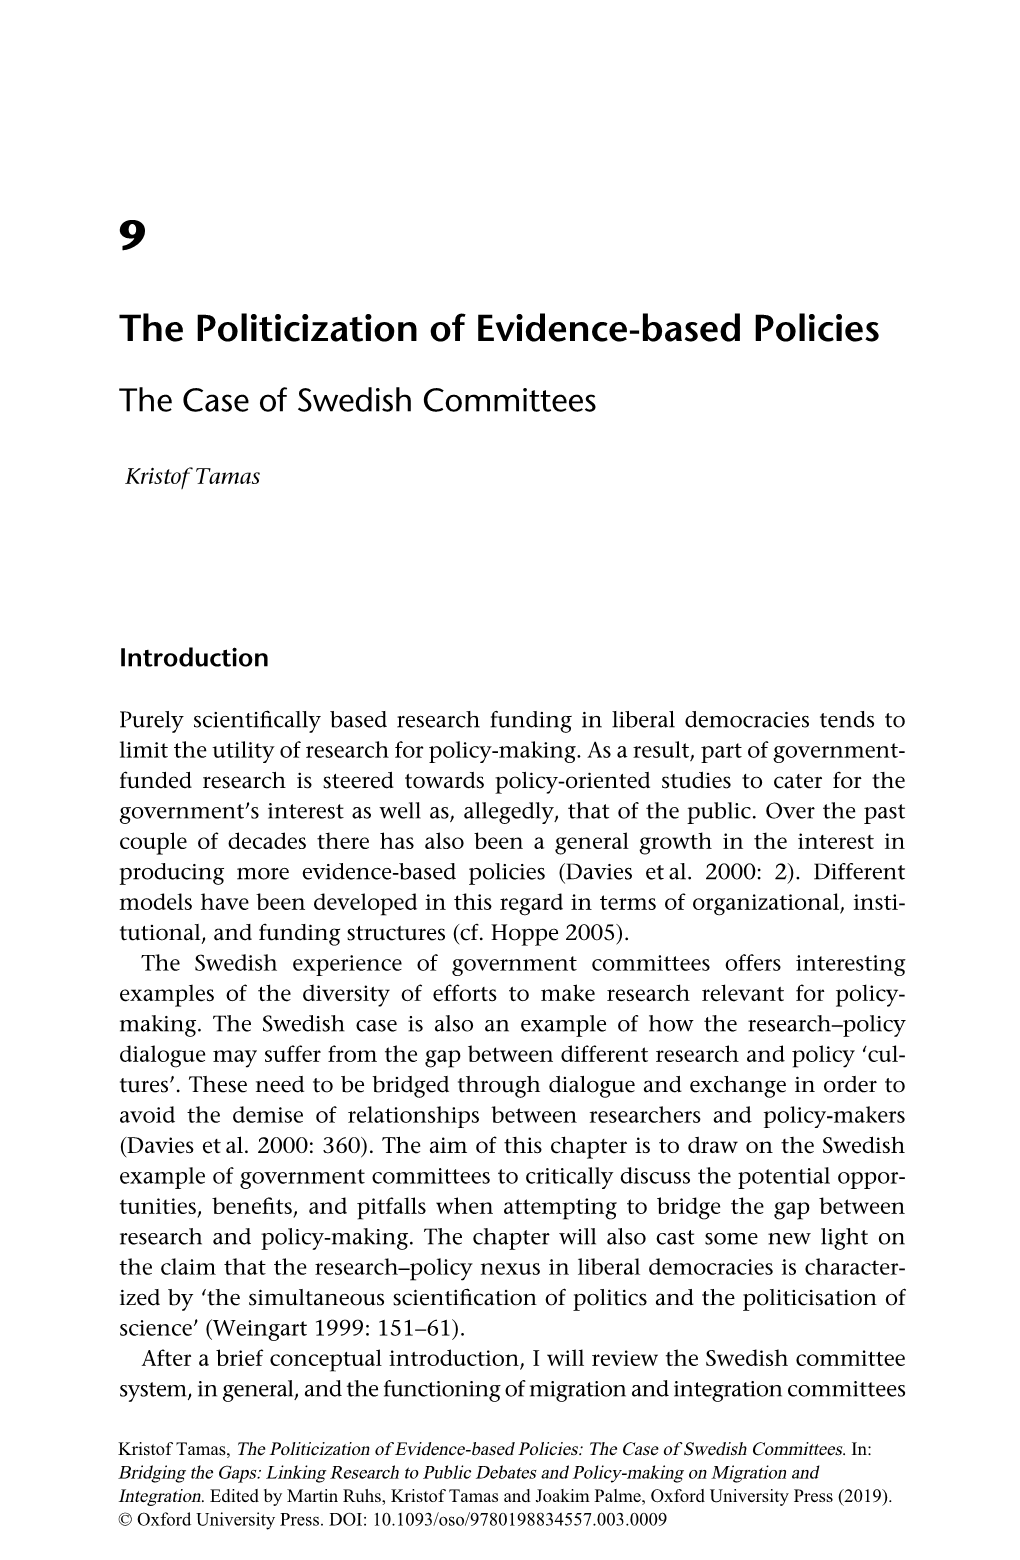 The Politicization of Evidence-Based Policies the Case of Swedish Committees